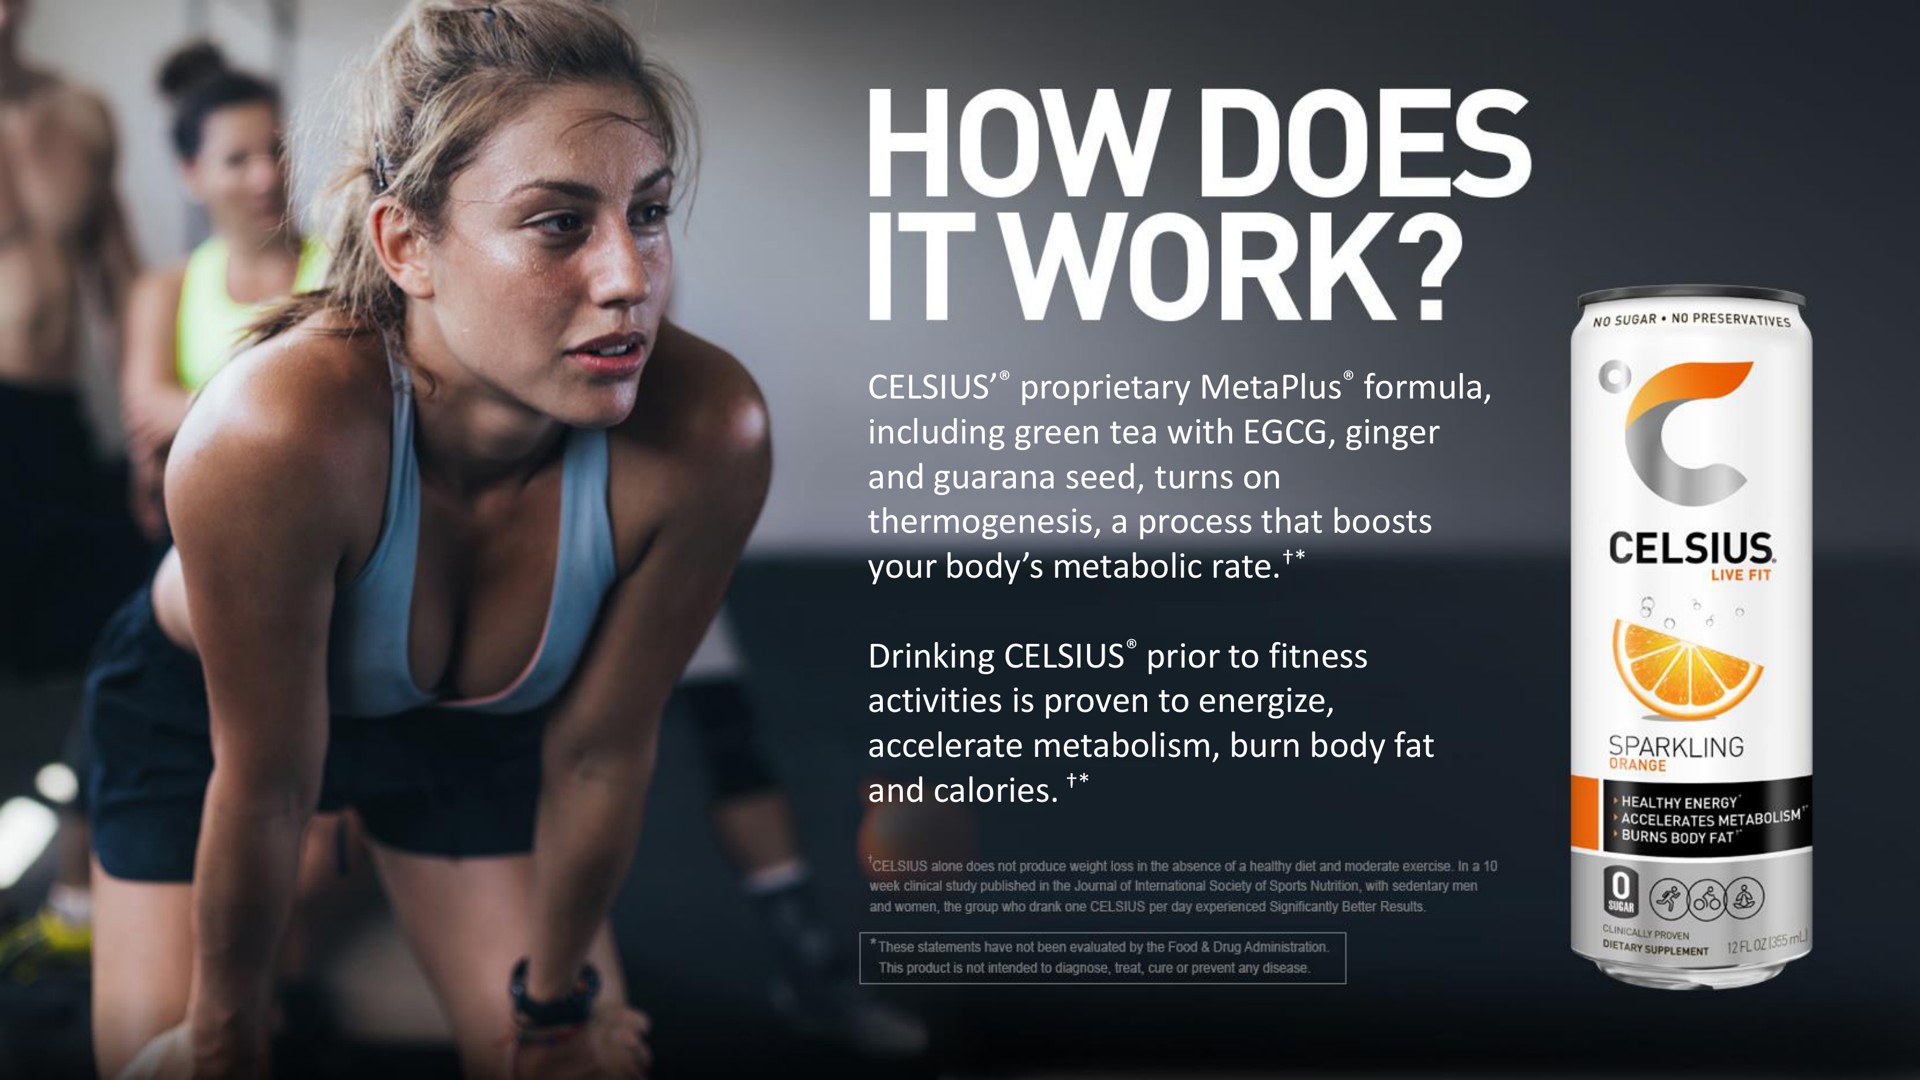 proprietary formula including green tea with ginger and guarana seed turns on thermogenesis a process that boosts your body metabolic rate drinking prior to fitness activities is proven to energize accelerate metabolism burn body fat and calories | Celsius Holdings